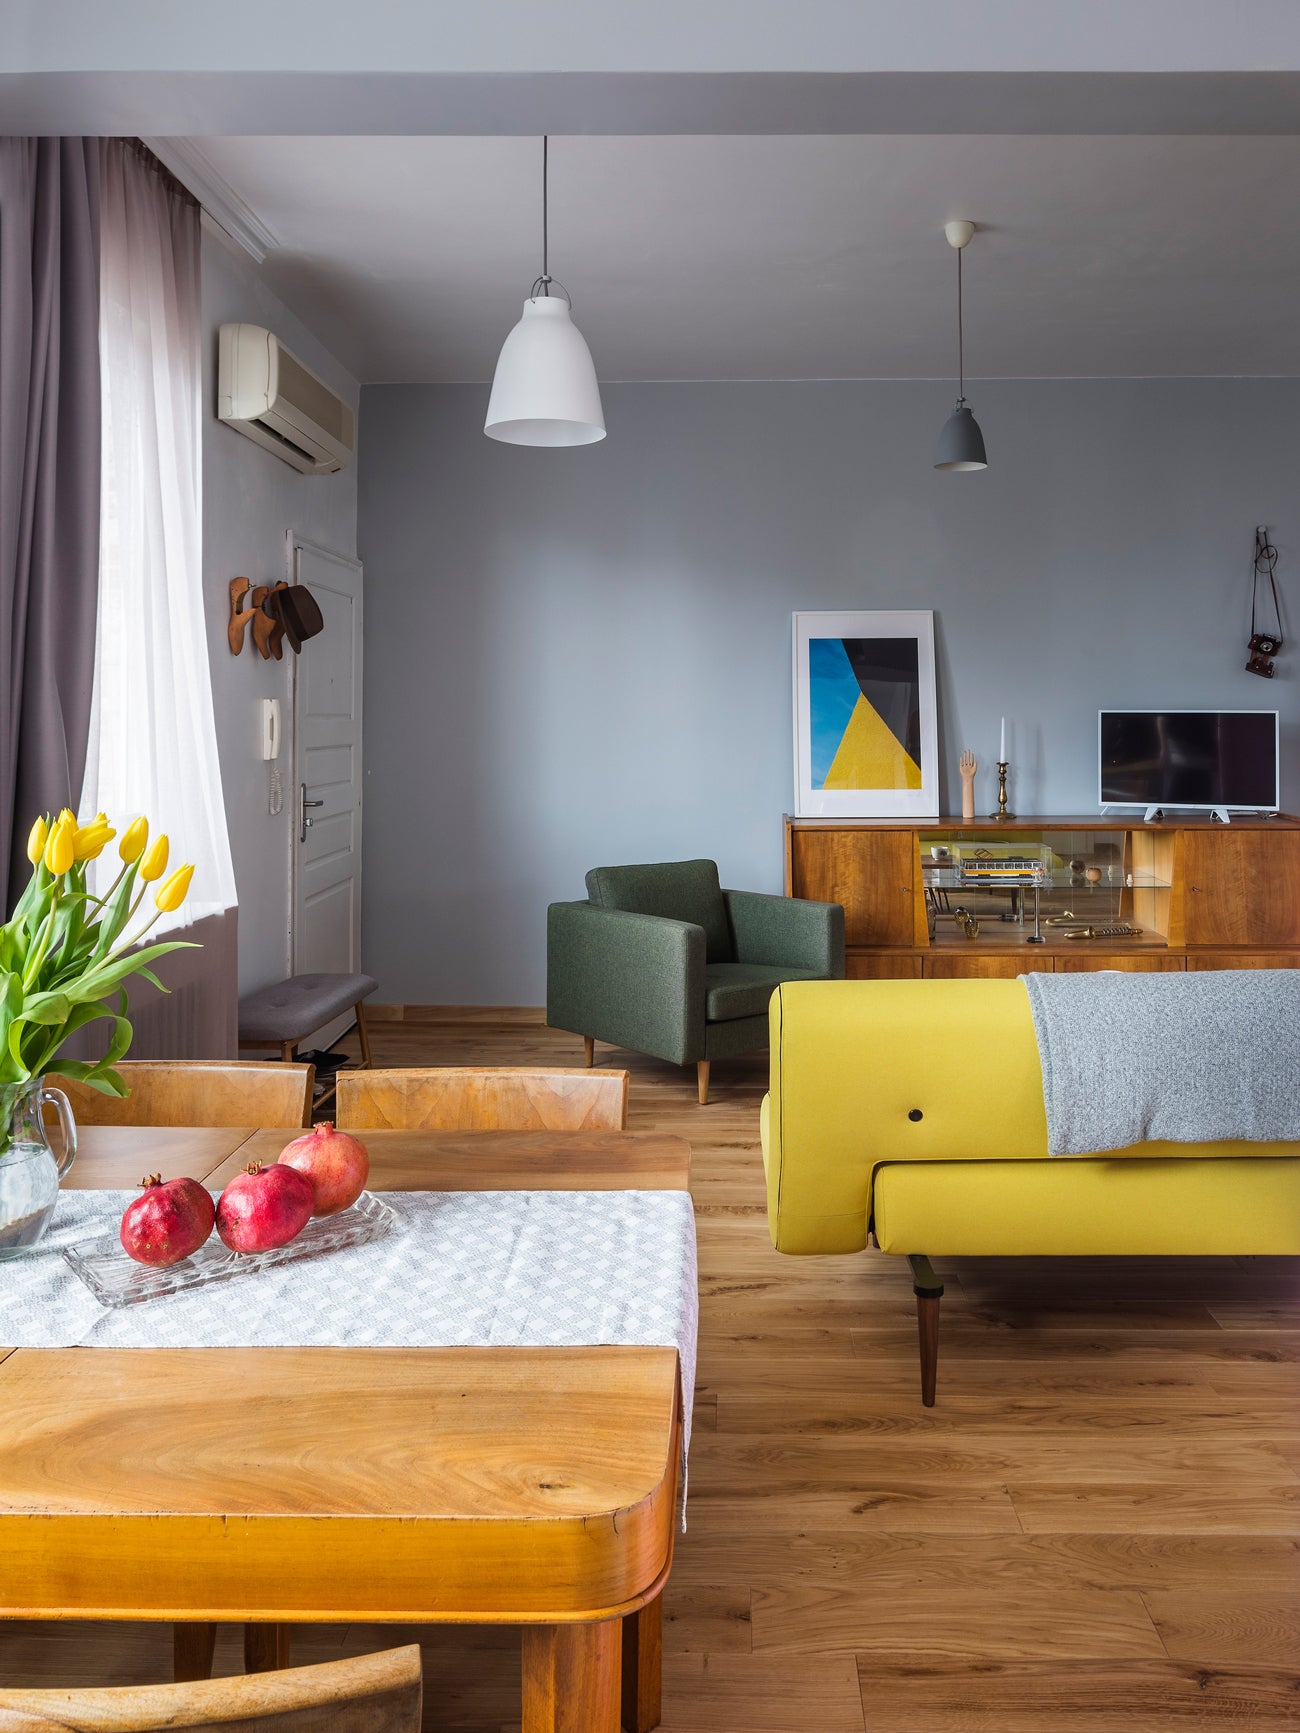 How to Make a Rental Feel Like Home, Whether You’re Staying 6 Weeks or 6 Months